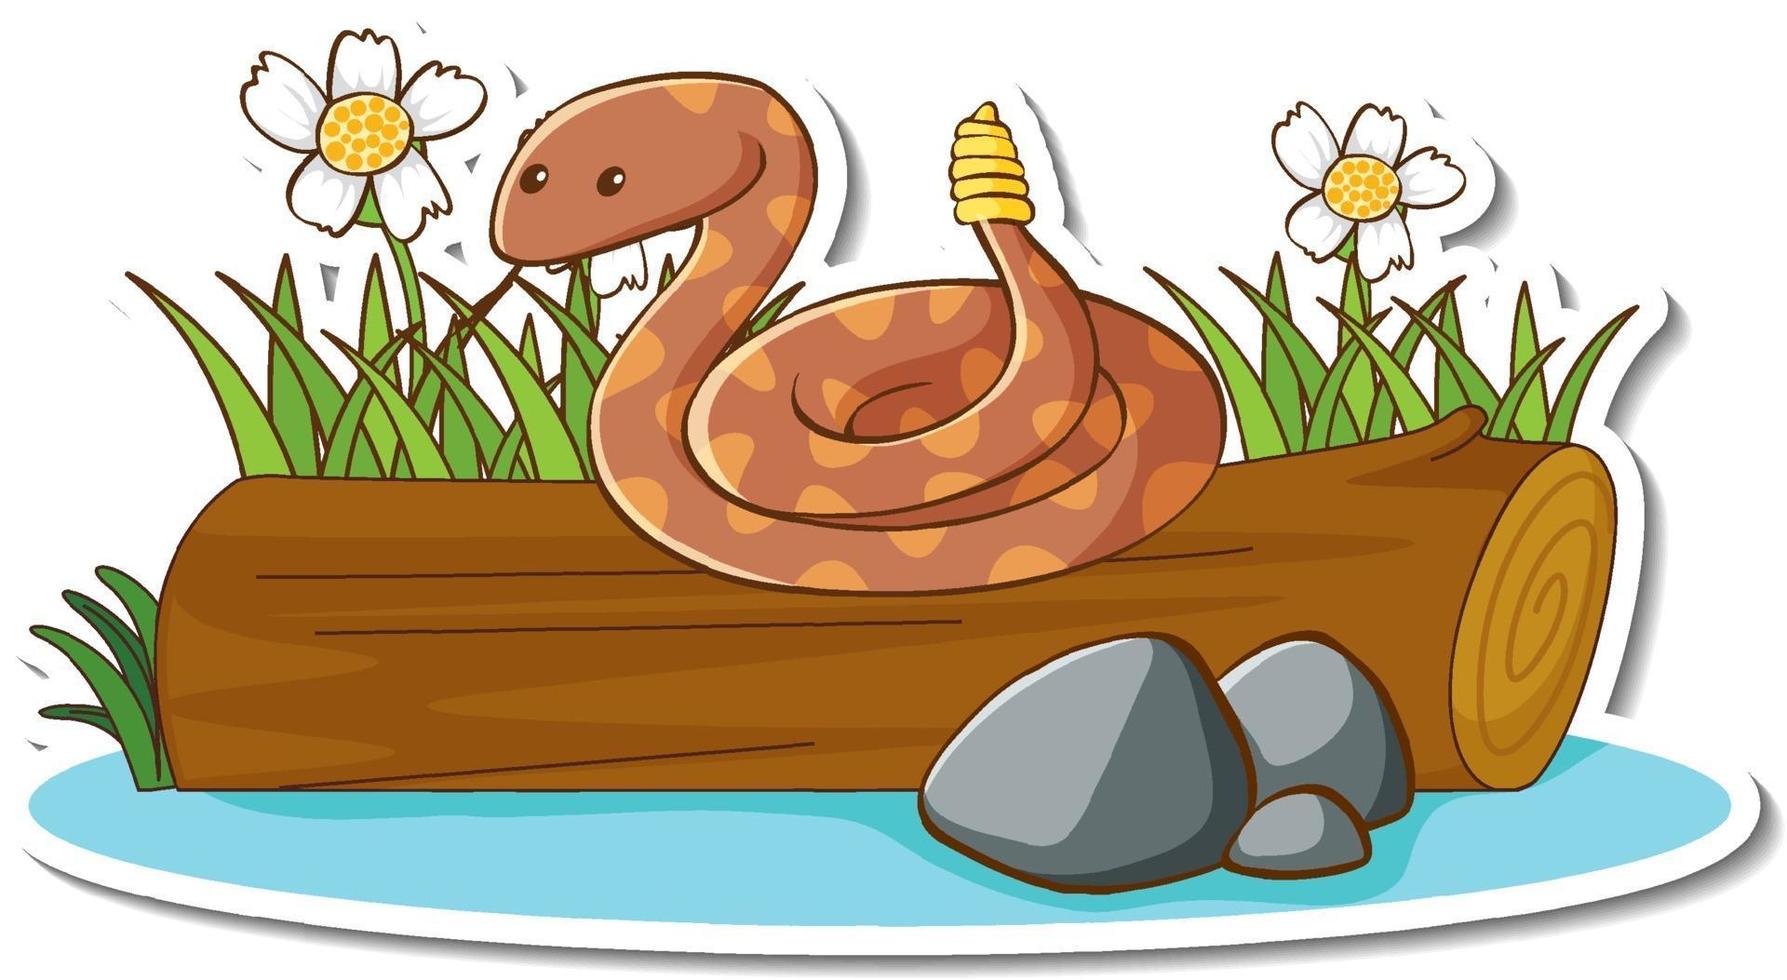 Rattle snake on a log with nature element sticker vector